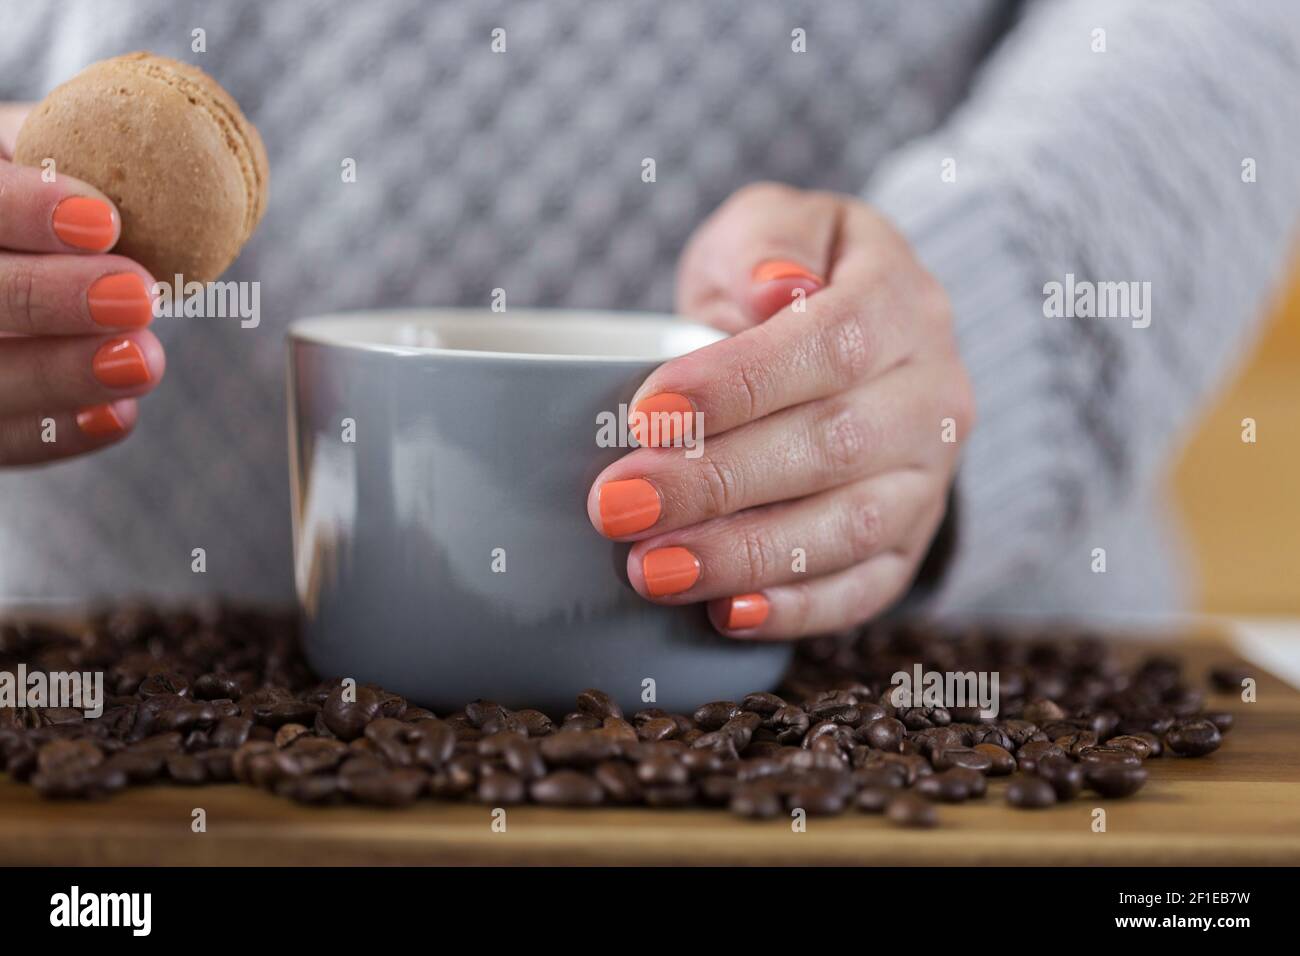 Female hand holding a mug of coffee and a macaroon. coffee beans on a wooden board. sweet dessert. Stock Photo